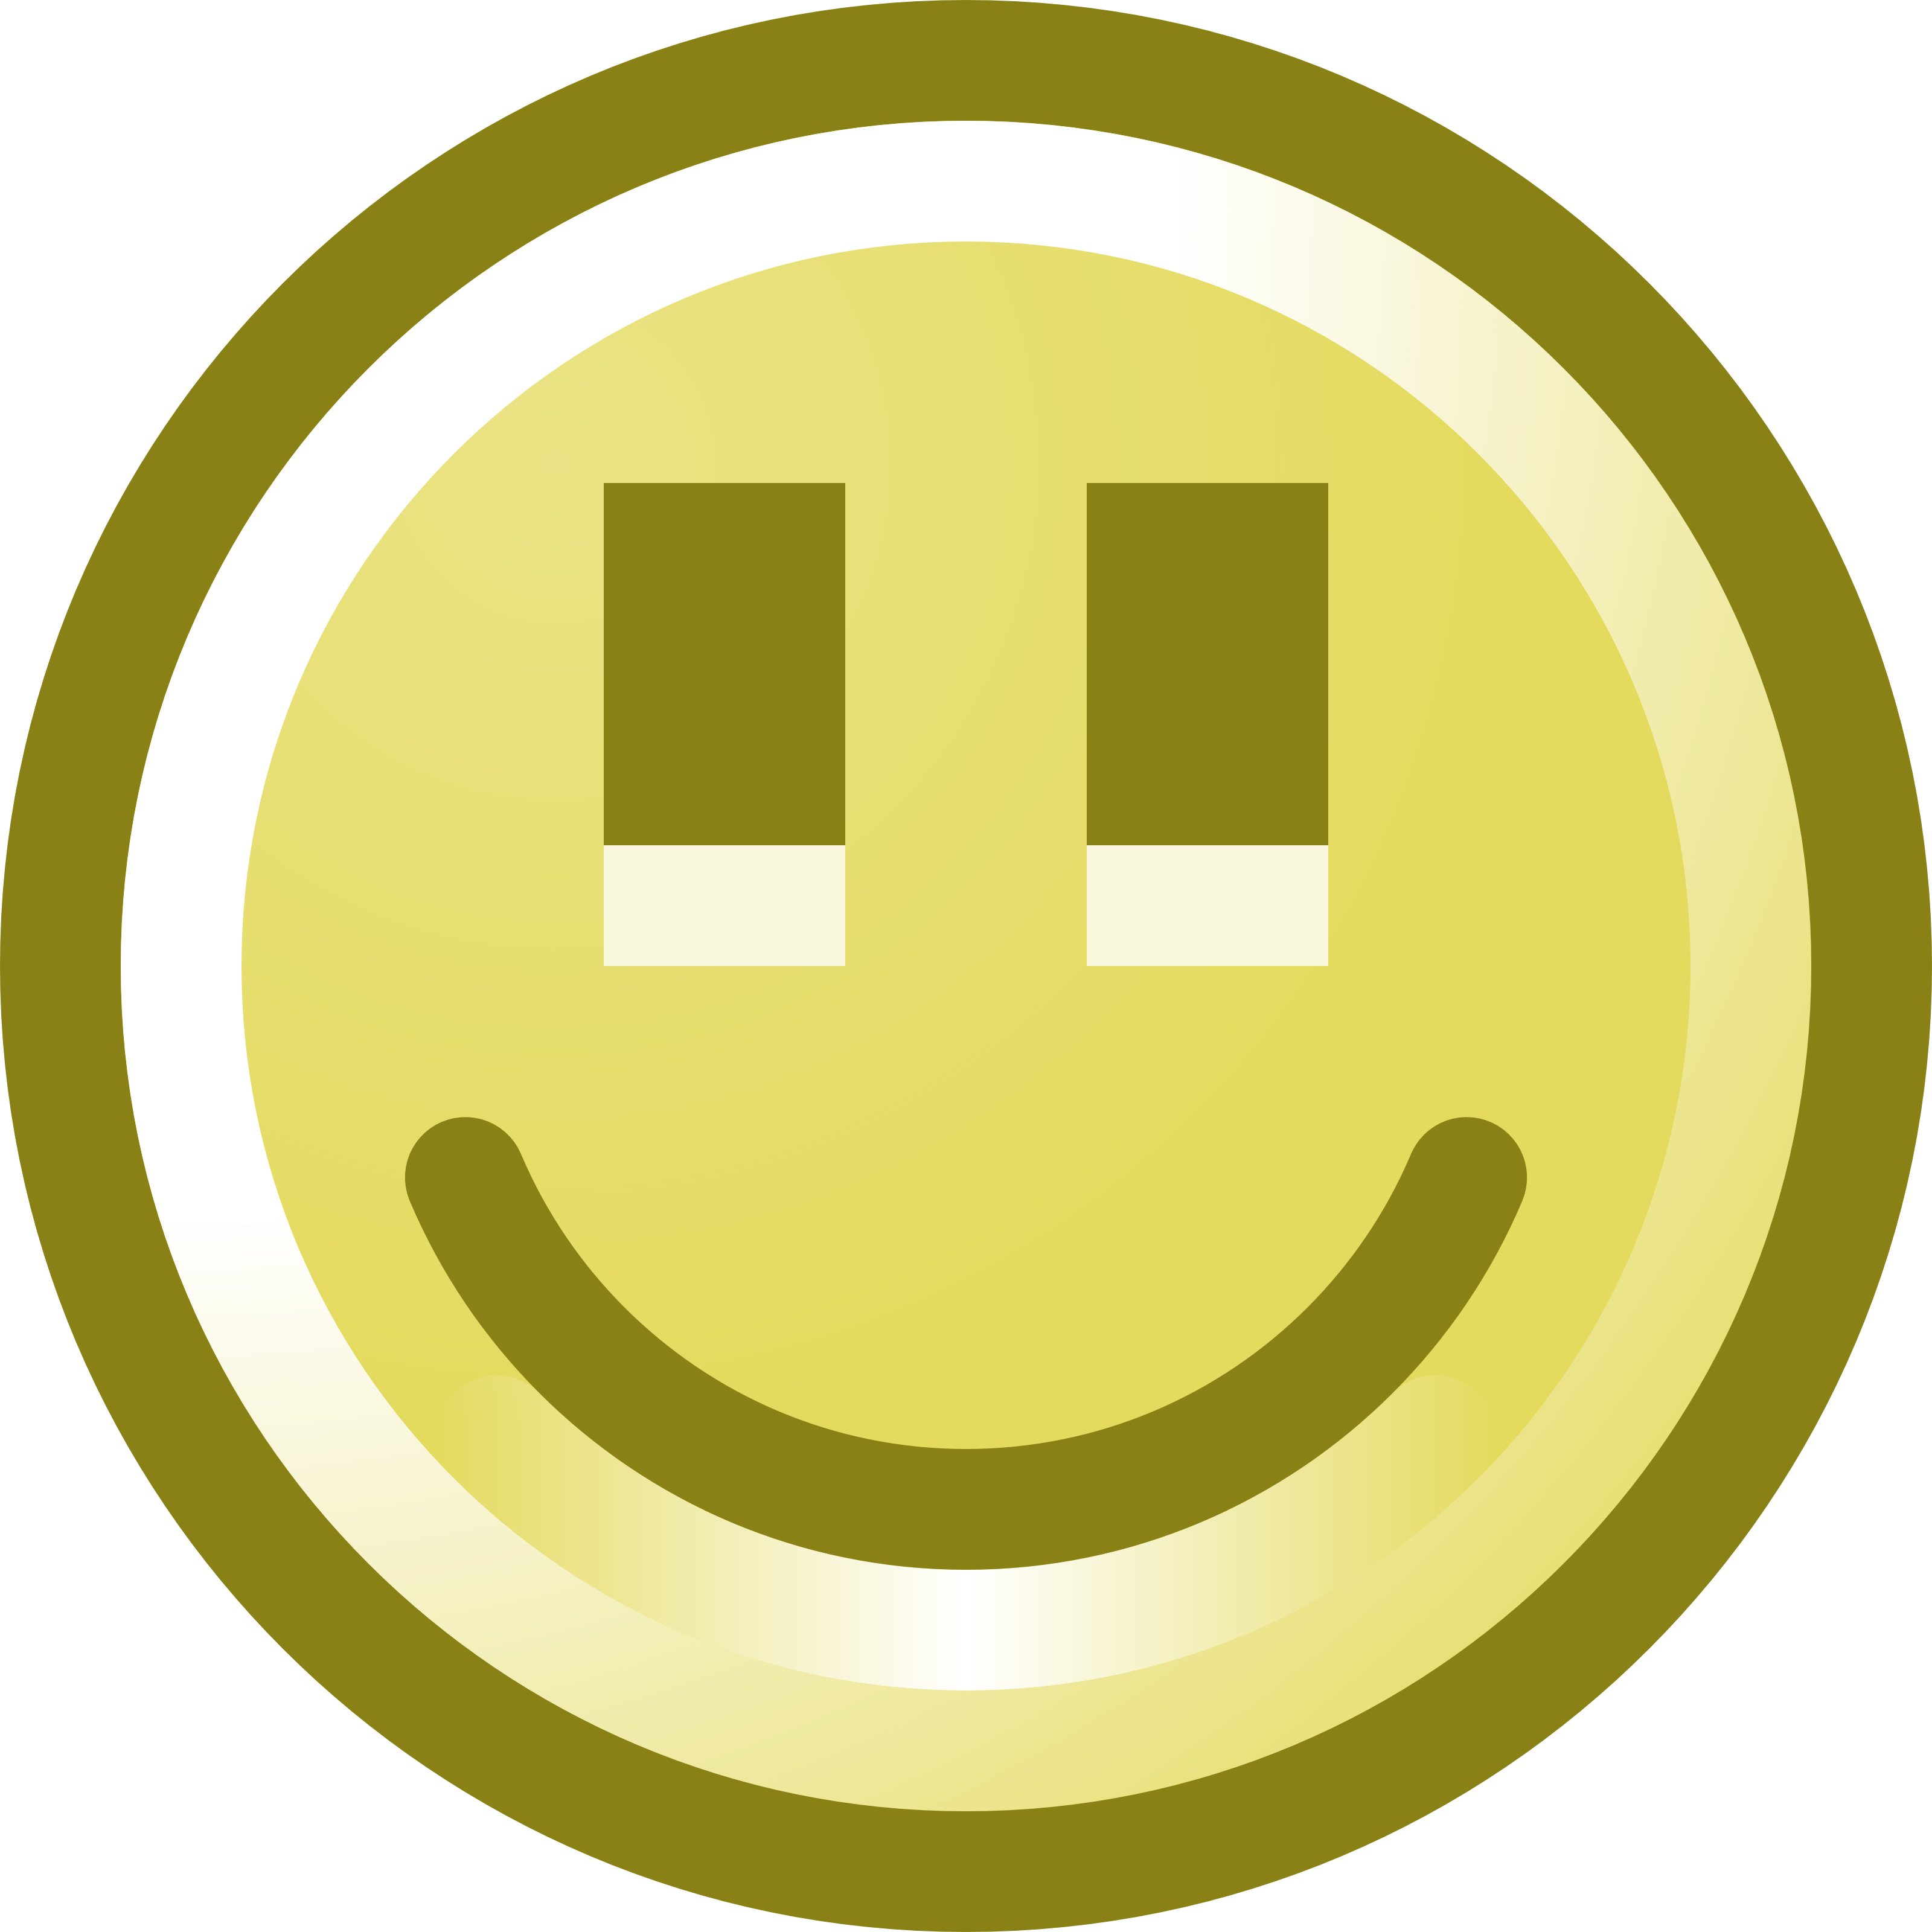 Smiley face happy face clip art royalty free image #346